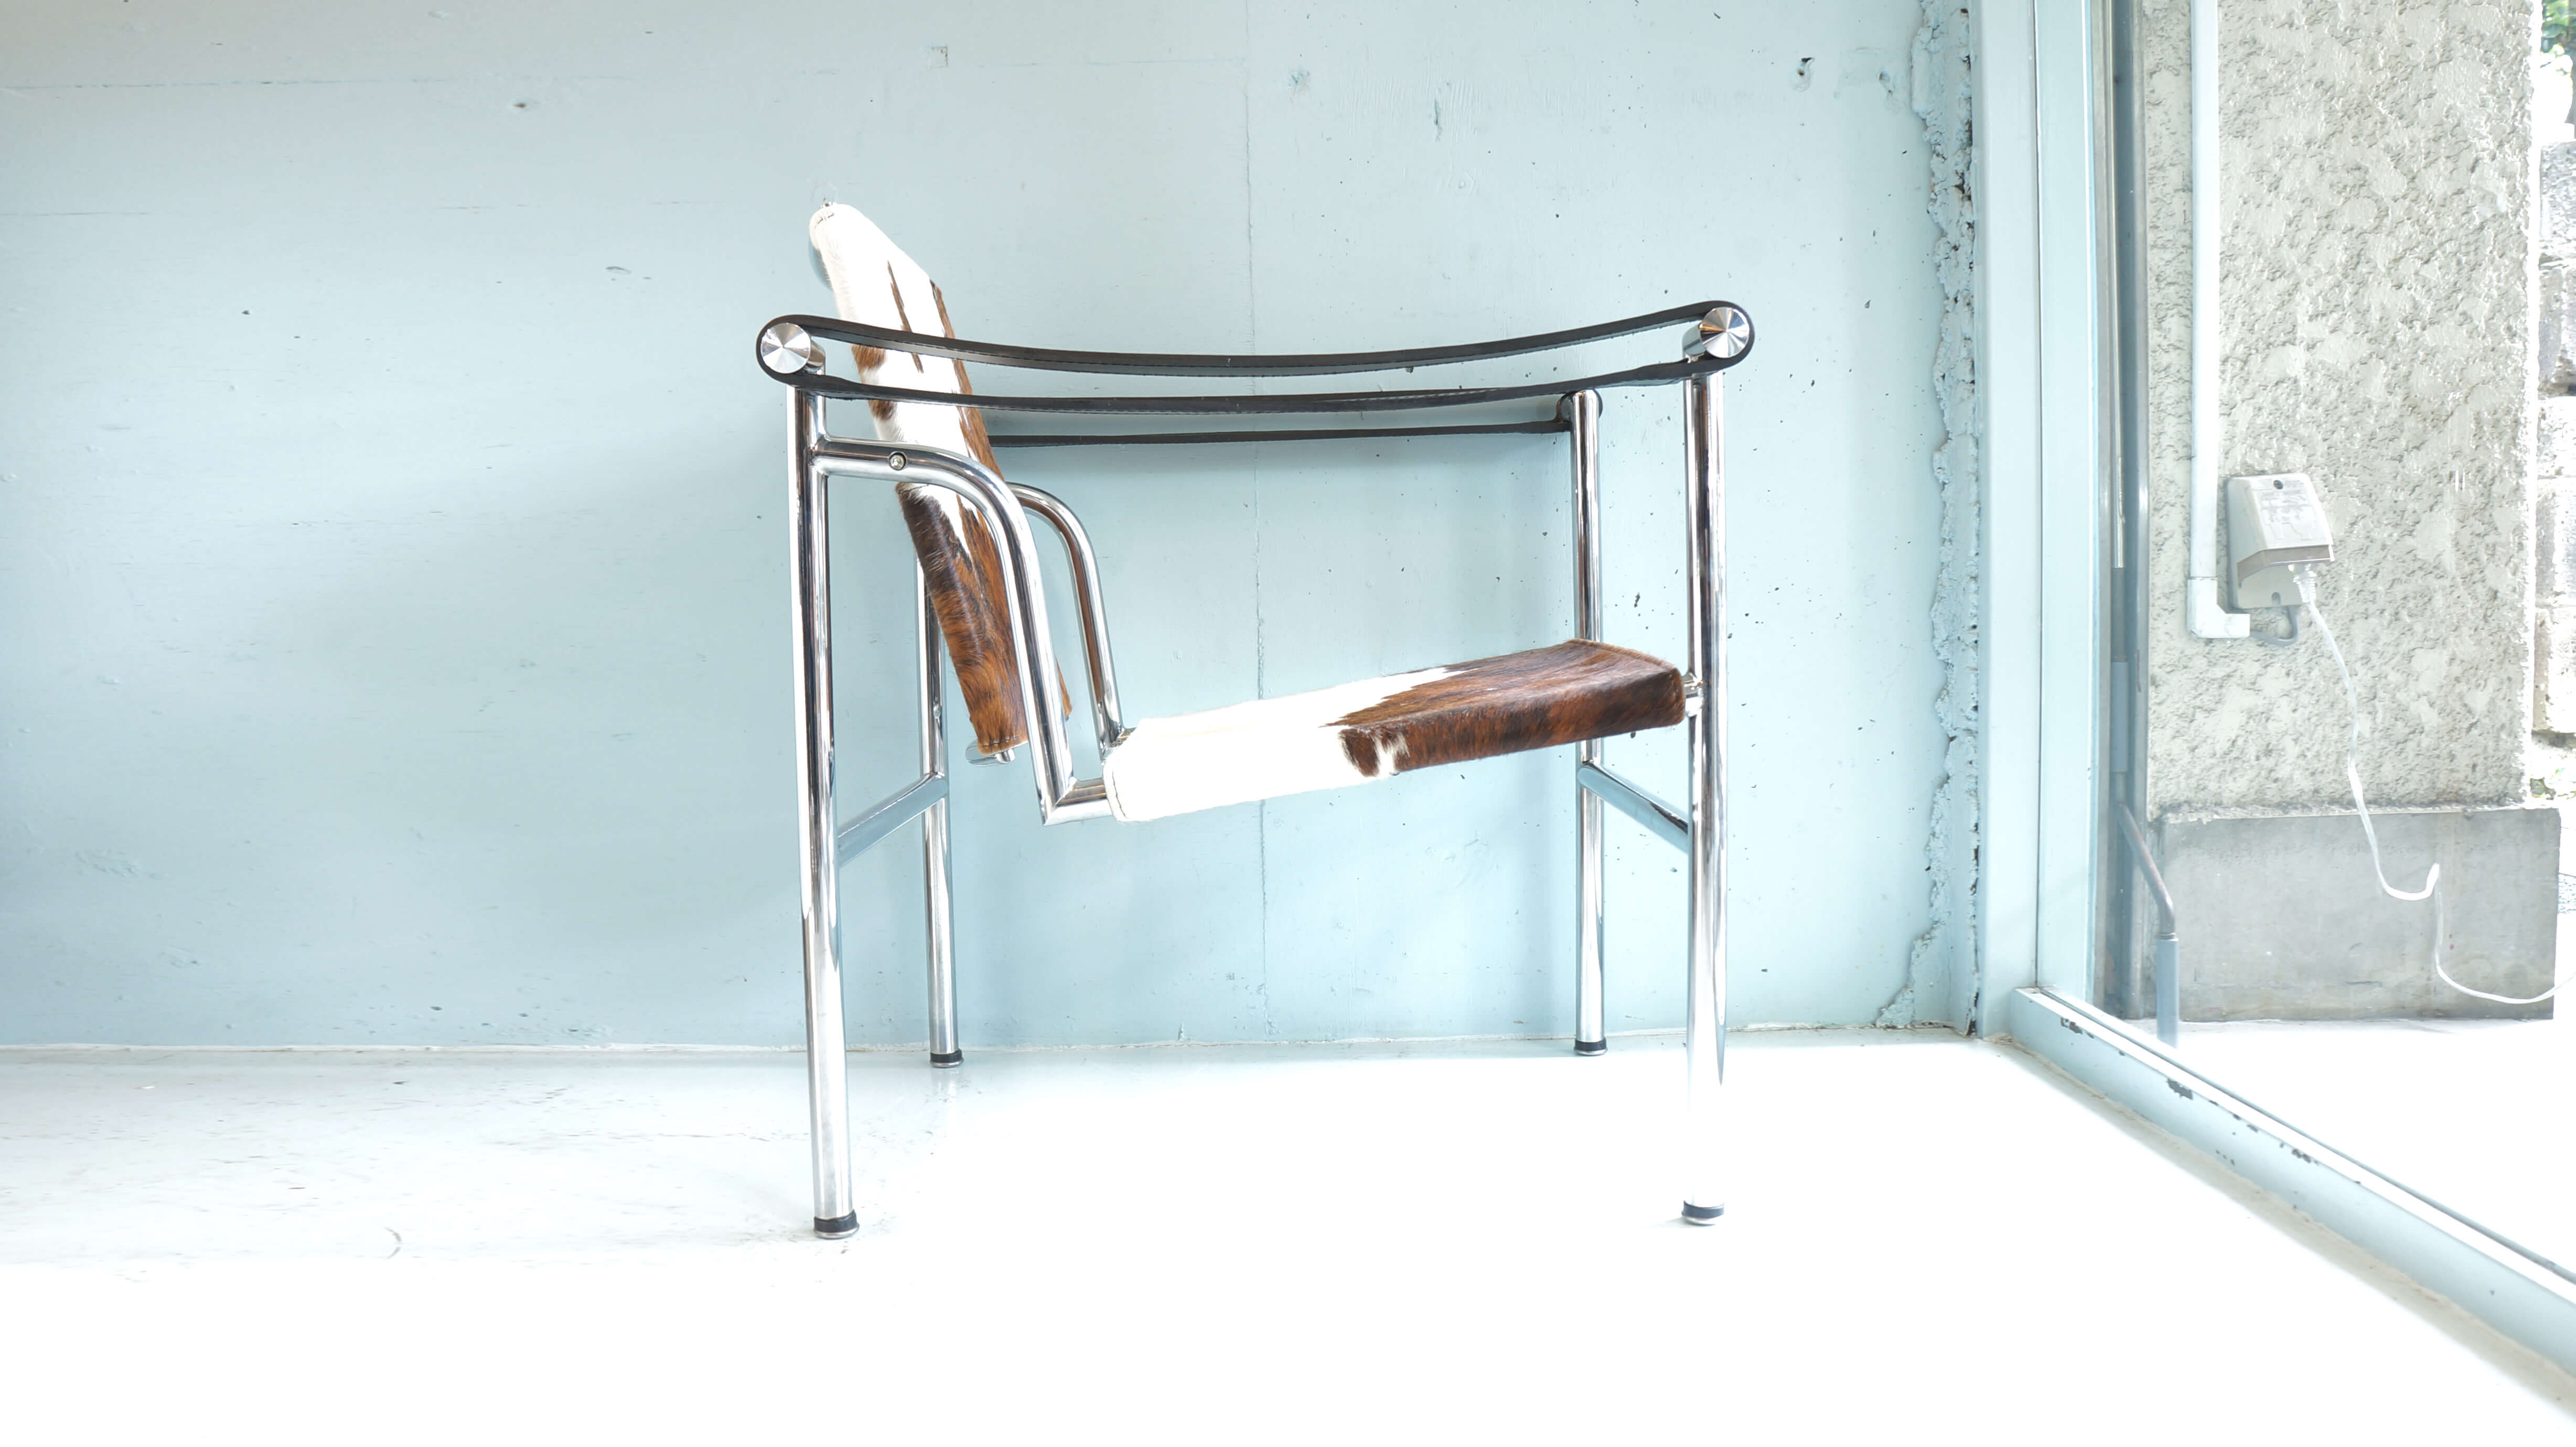 LC1 Sling chair design by Le Corbusier / スリングチェア バスキュランチェア ル・コルビュジエ